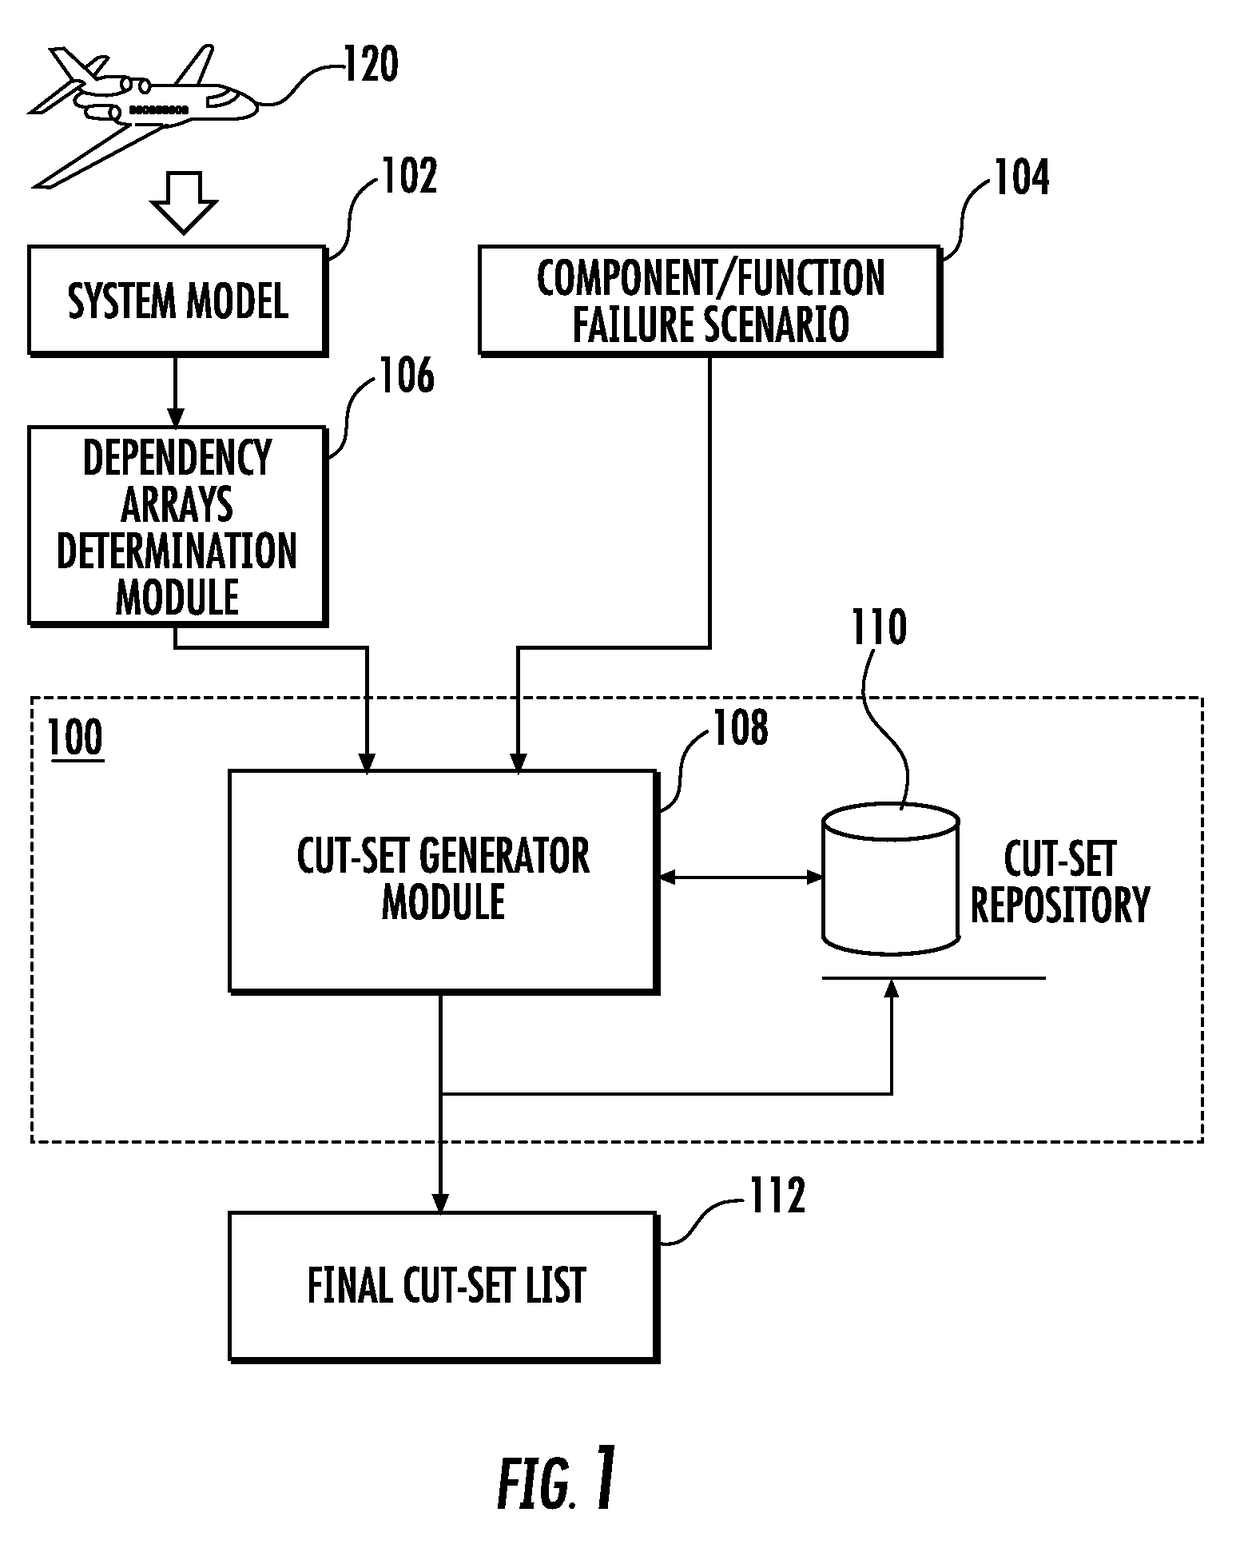 Method and system for generating minimal cut-sets for highly integrated large systems